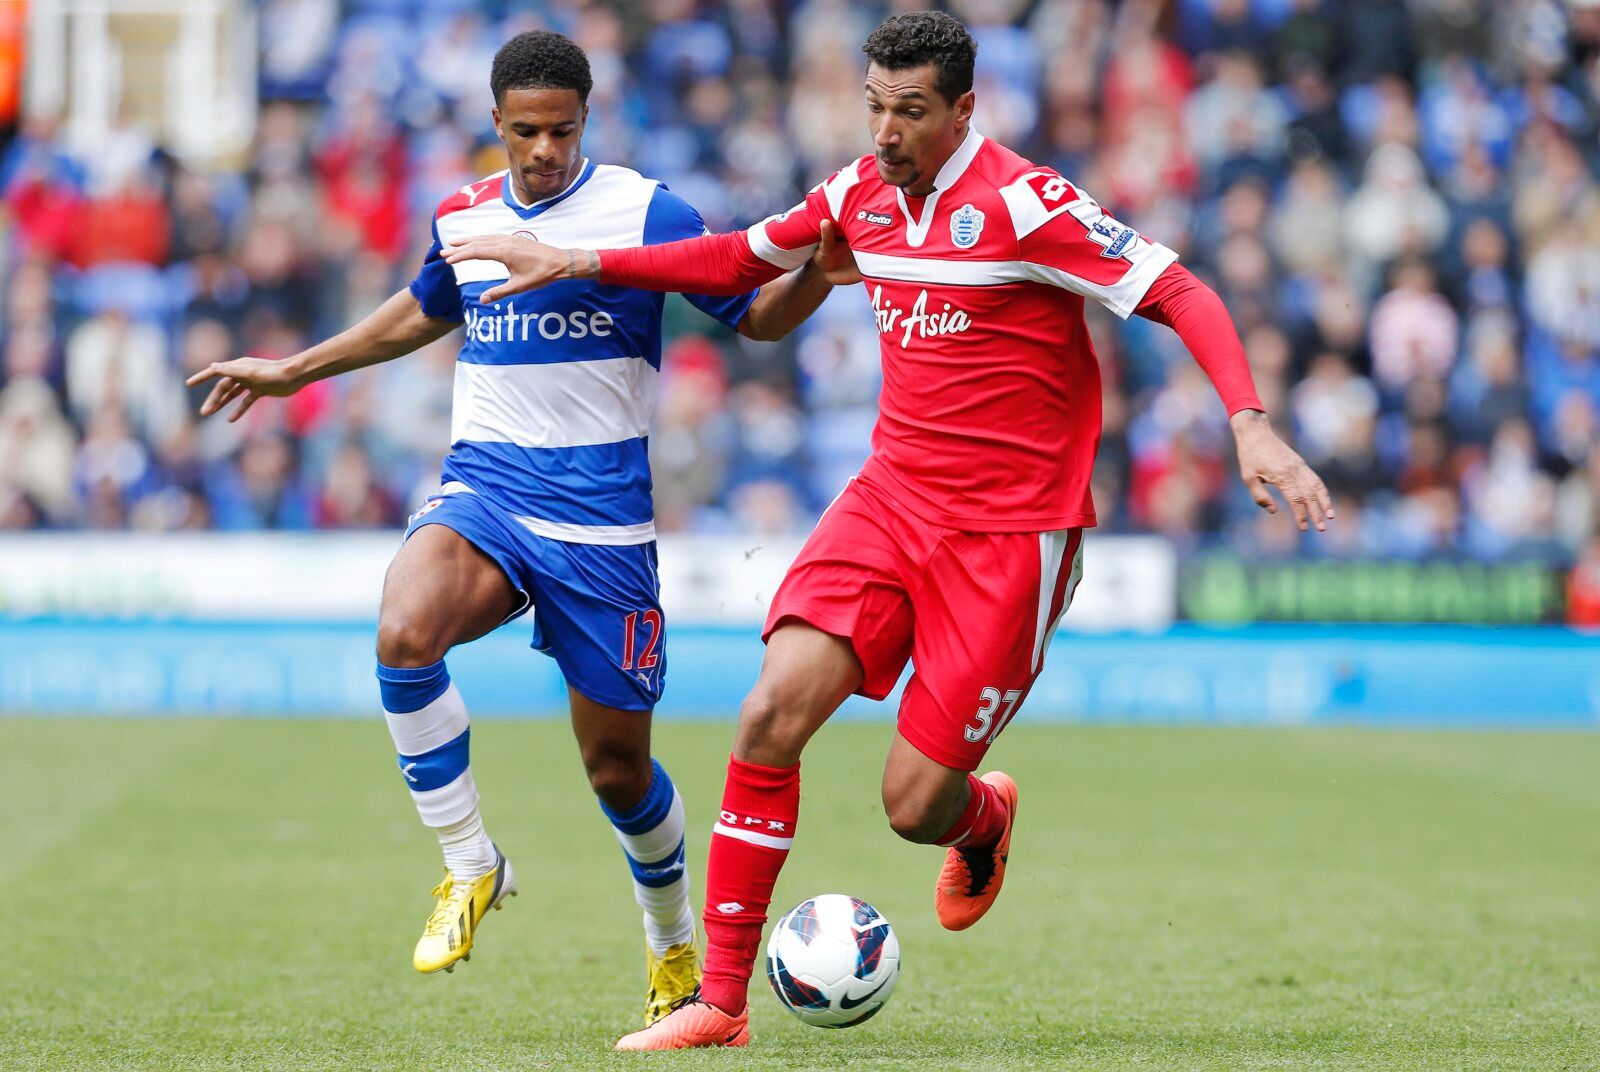 Football - Reading v Queens Park Rangers - Barclays Premier League  - The Madejski Stadium - 28/4/13 
QPR's Jay Bothroyd (R) in action with Reading's Garath McCleary 
Mandatory Credit: Action Images / Andrew Couldridge 
Livepic 
EDITORIAL USE ONLY. No use with unauthorized audio, video, data, fixture lists, club/league logos or live services. Online in-match use limited to 45 images, no video emulation. No use in betting, games or single club/league/player publications.  Please contact your acco